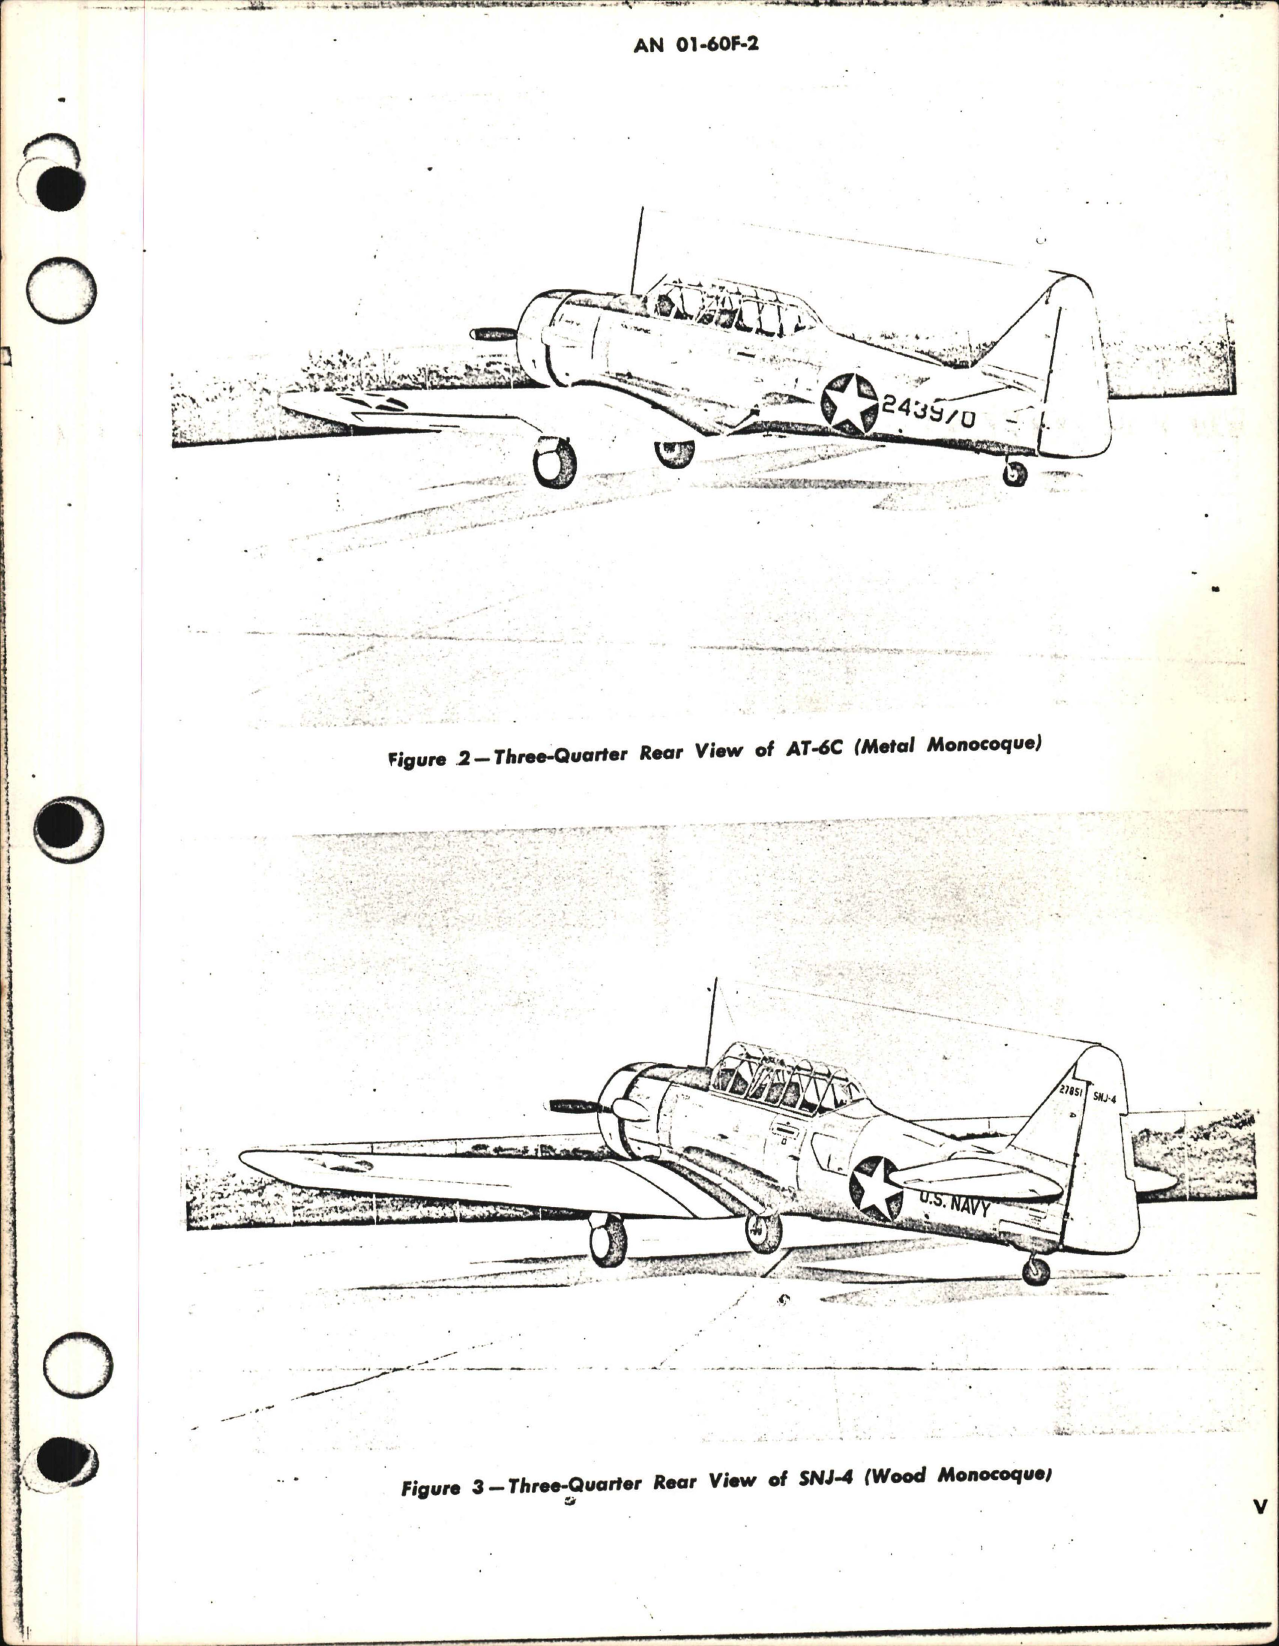 Sample page 7 from AirCorps Library document: Erection & Maintenance Instructions for T-6C, T-6D, SNJ-3, SNJ-4, SNJ-5, and SNJ-6